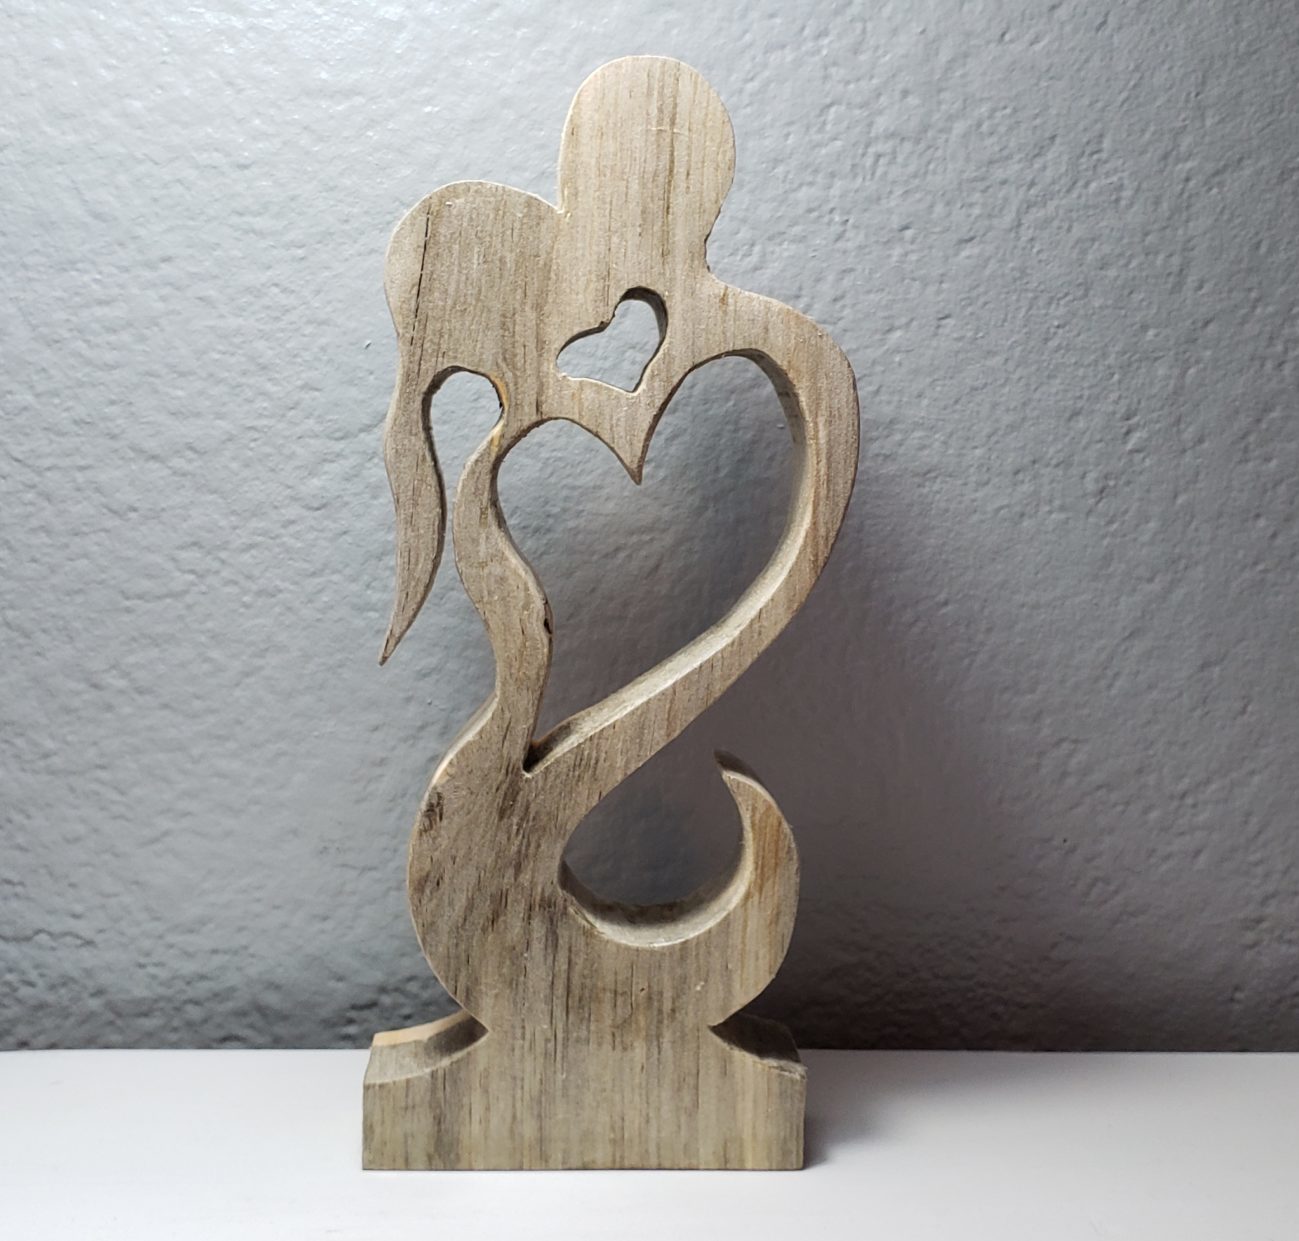 The Love in Wood